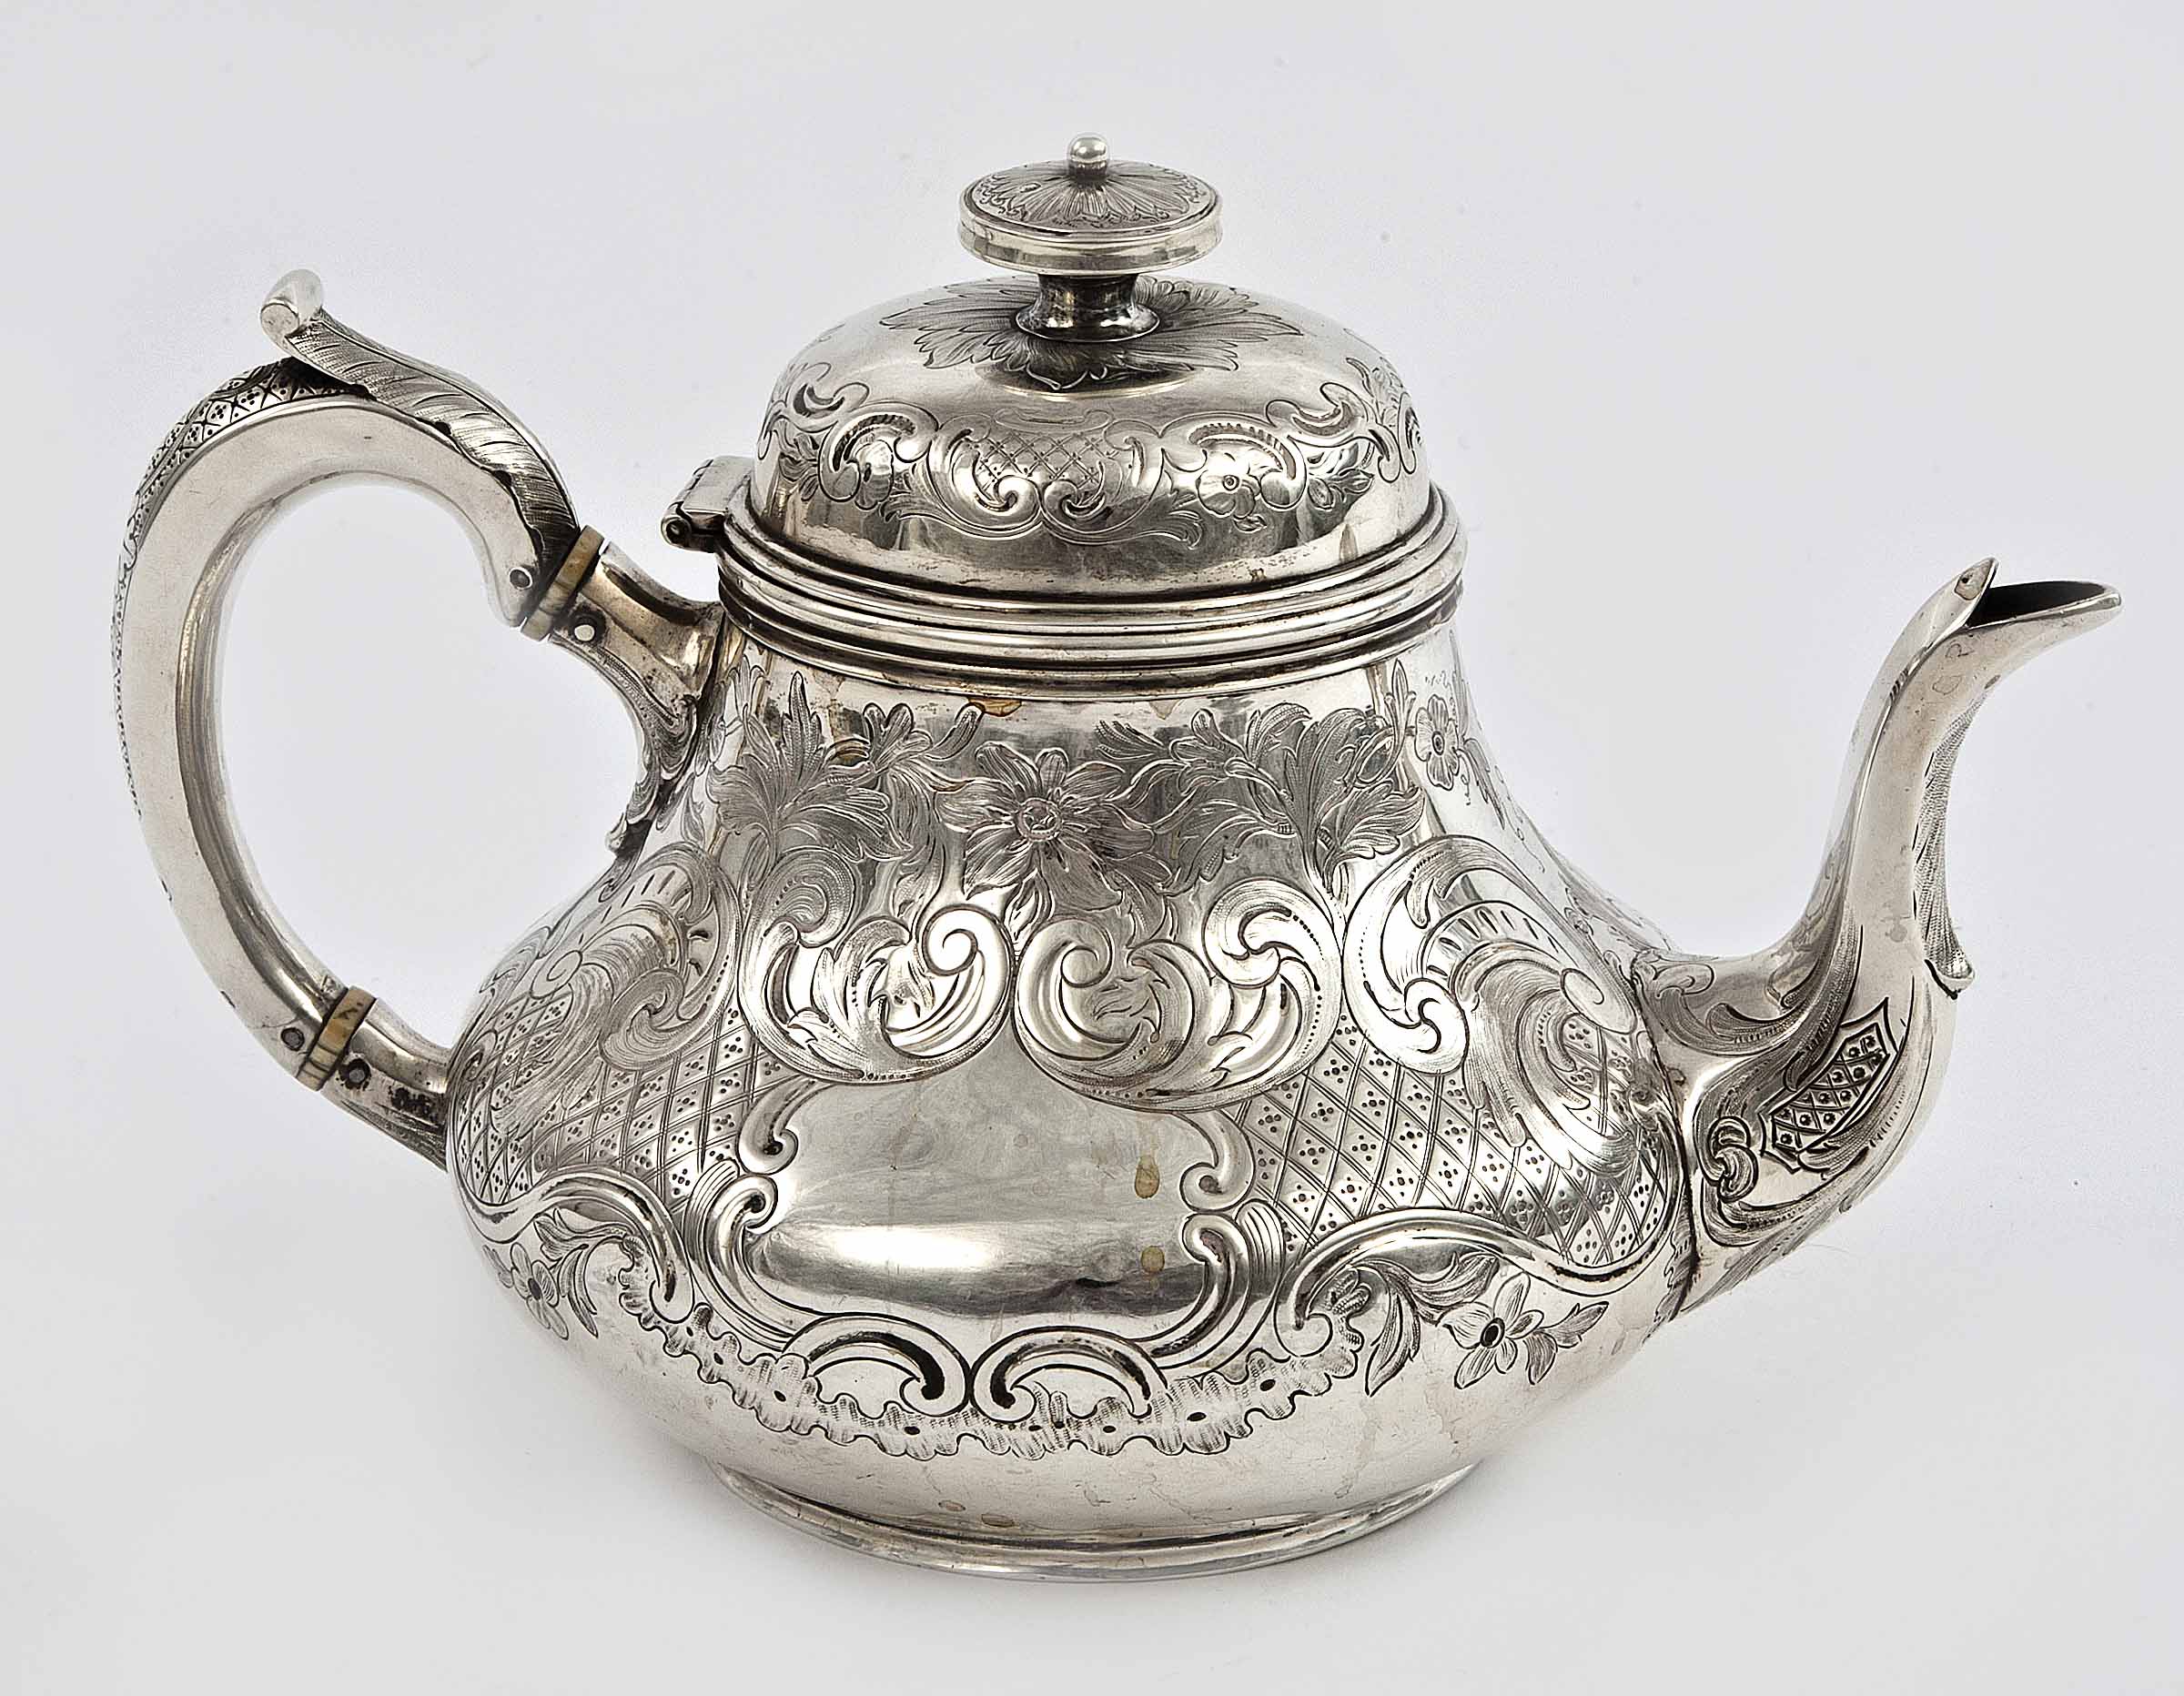 AN IRISH VICTORIAN SILVER TEAPOT, by R.S. Dublin 1858, chased with ornate scrolls, foliage and